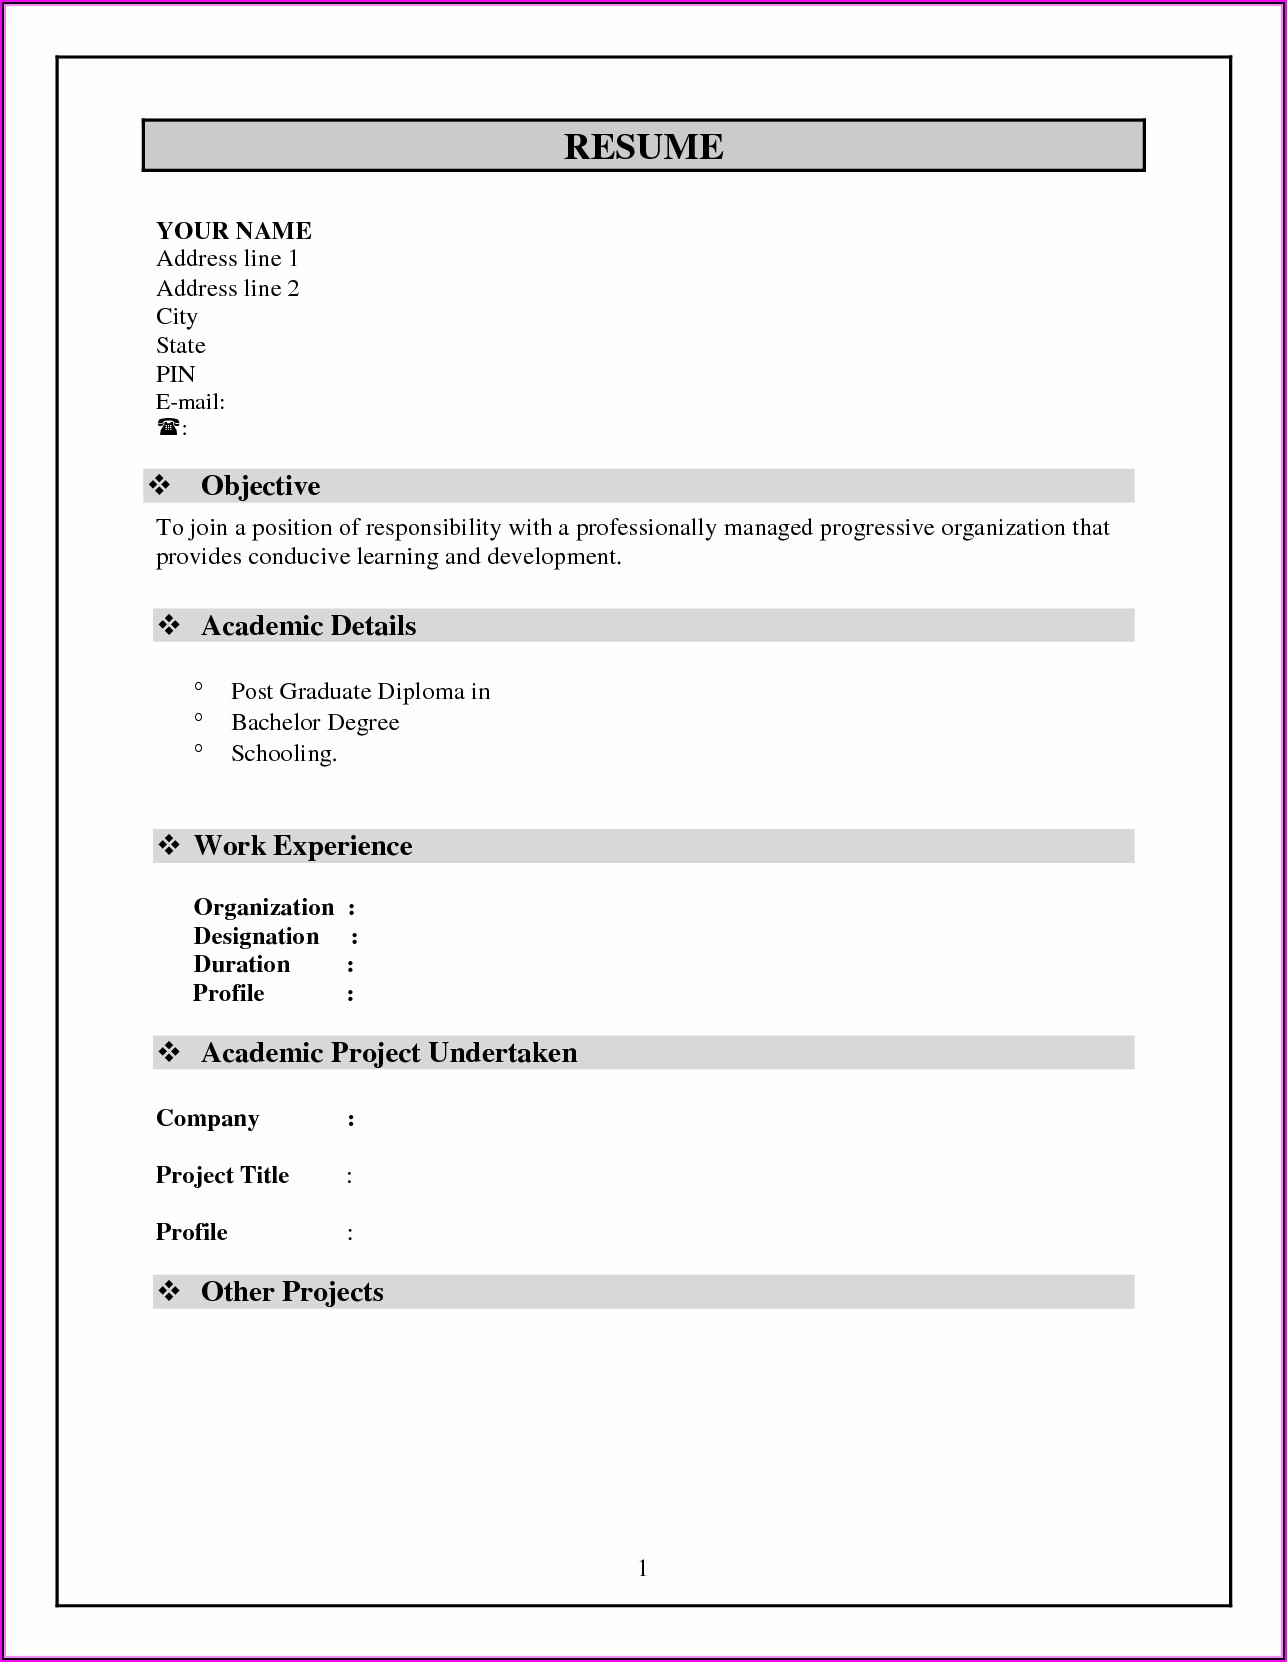 Resume Format For Freshers Free Download Doc